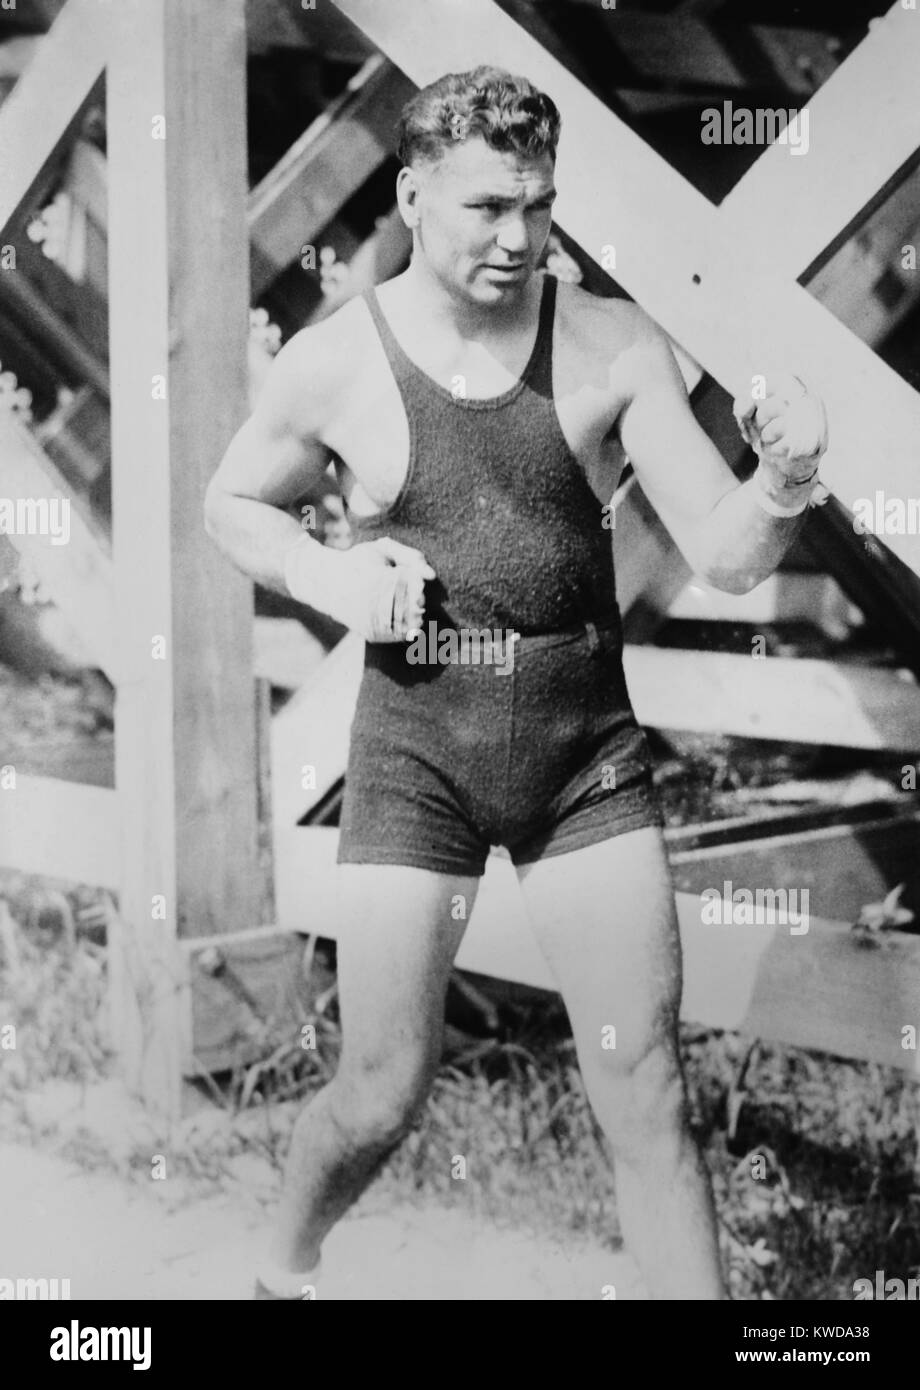 Jack Dempsey, the World Heavyweight Boxing Champion from 1919 to 1926 ...